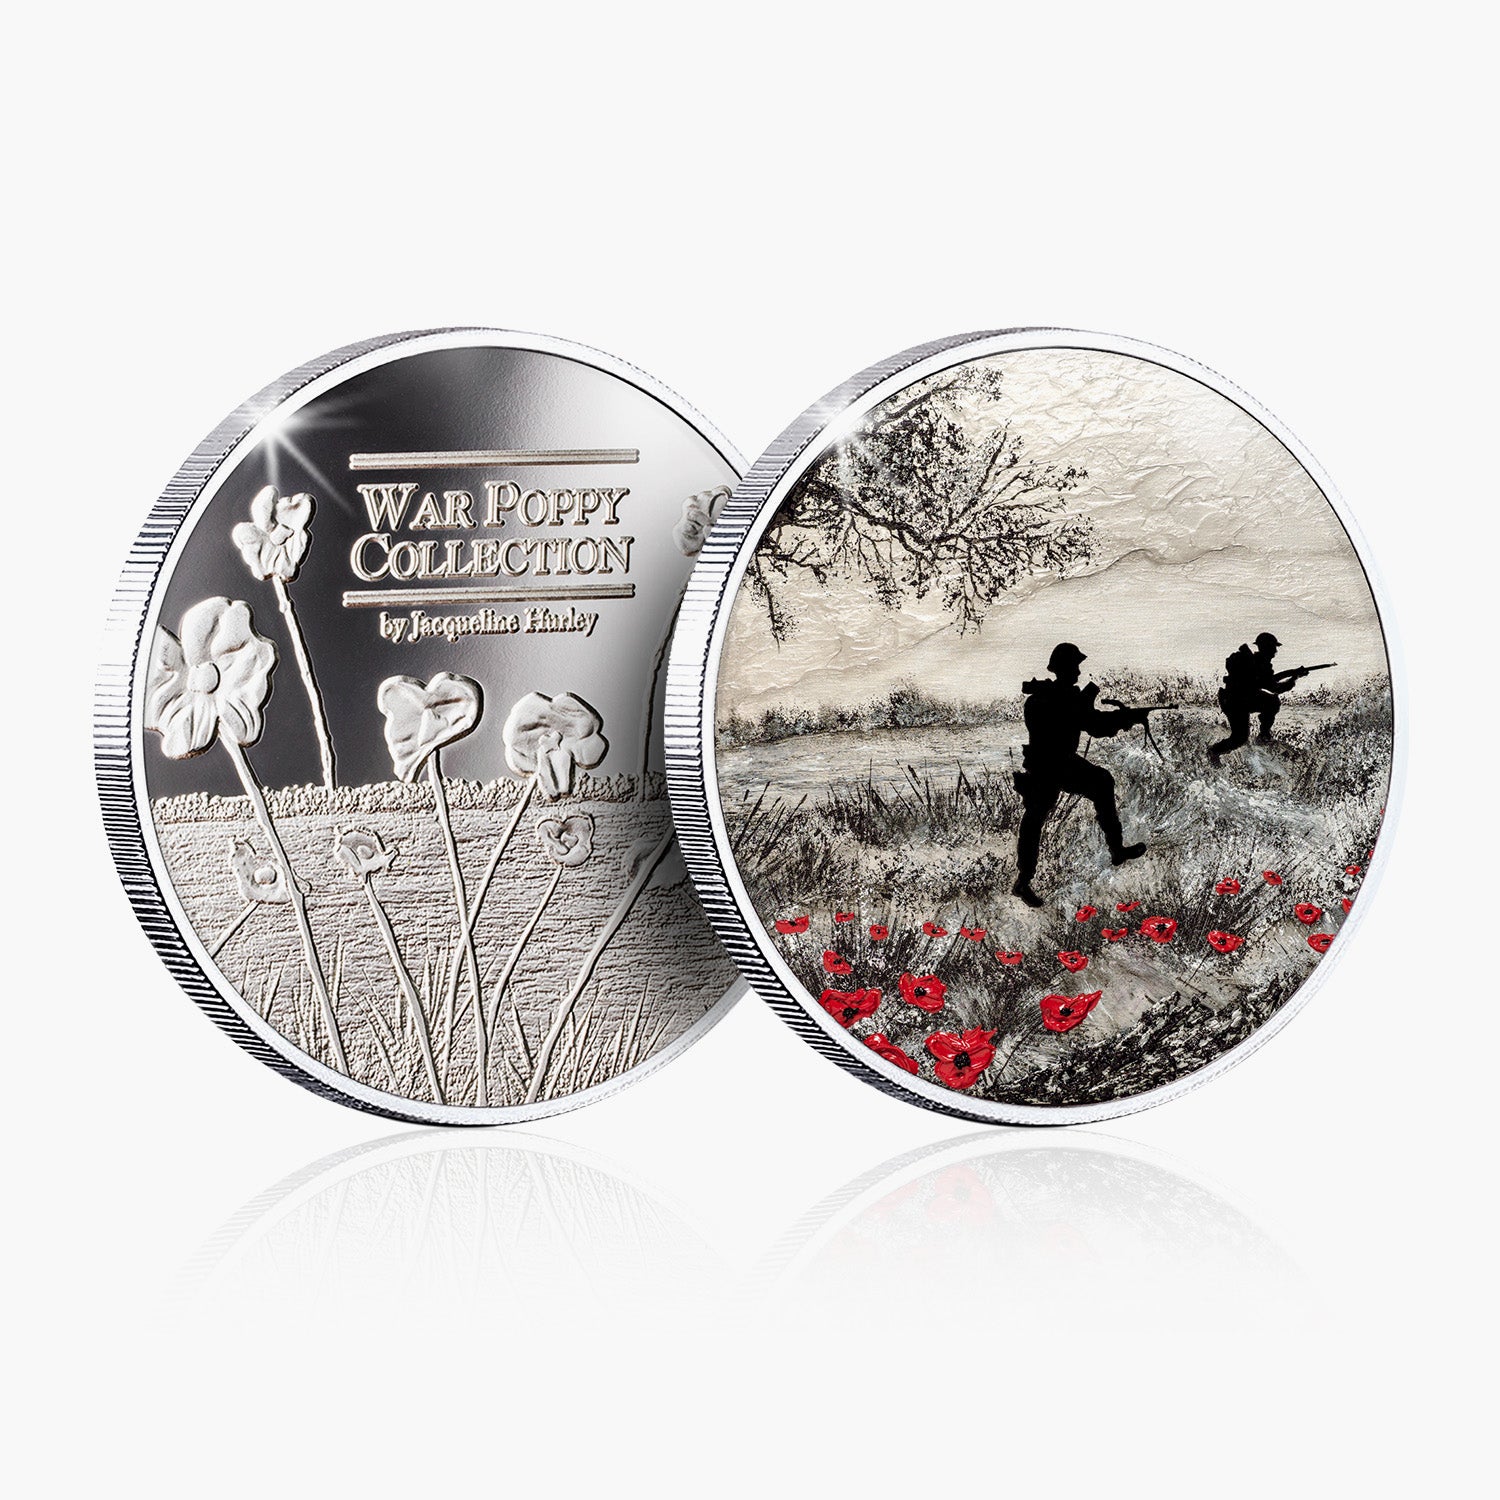 For The Swift and Bold, Silver-Plated Commemorative